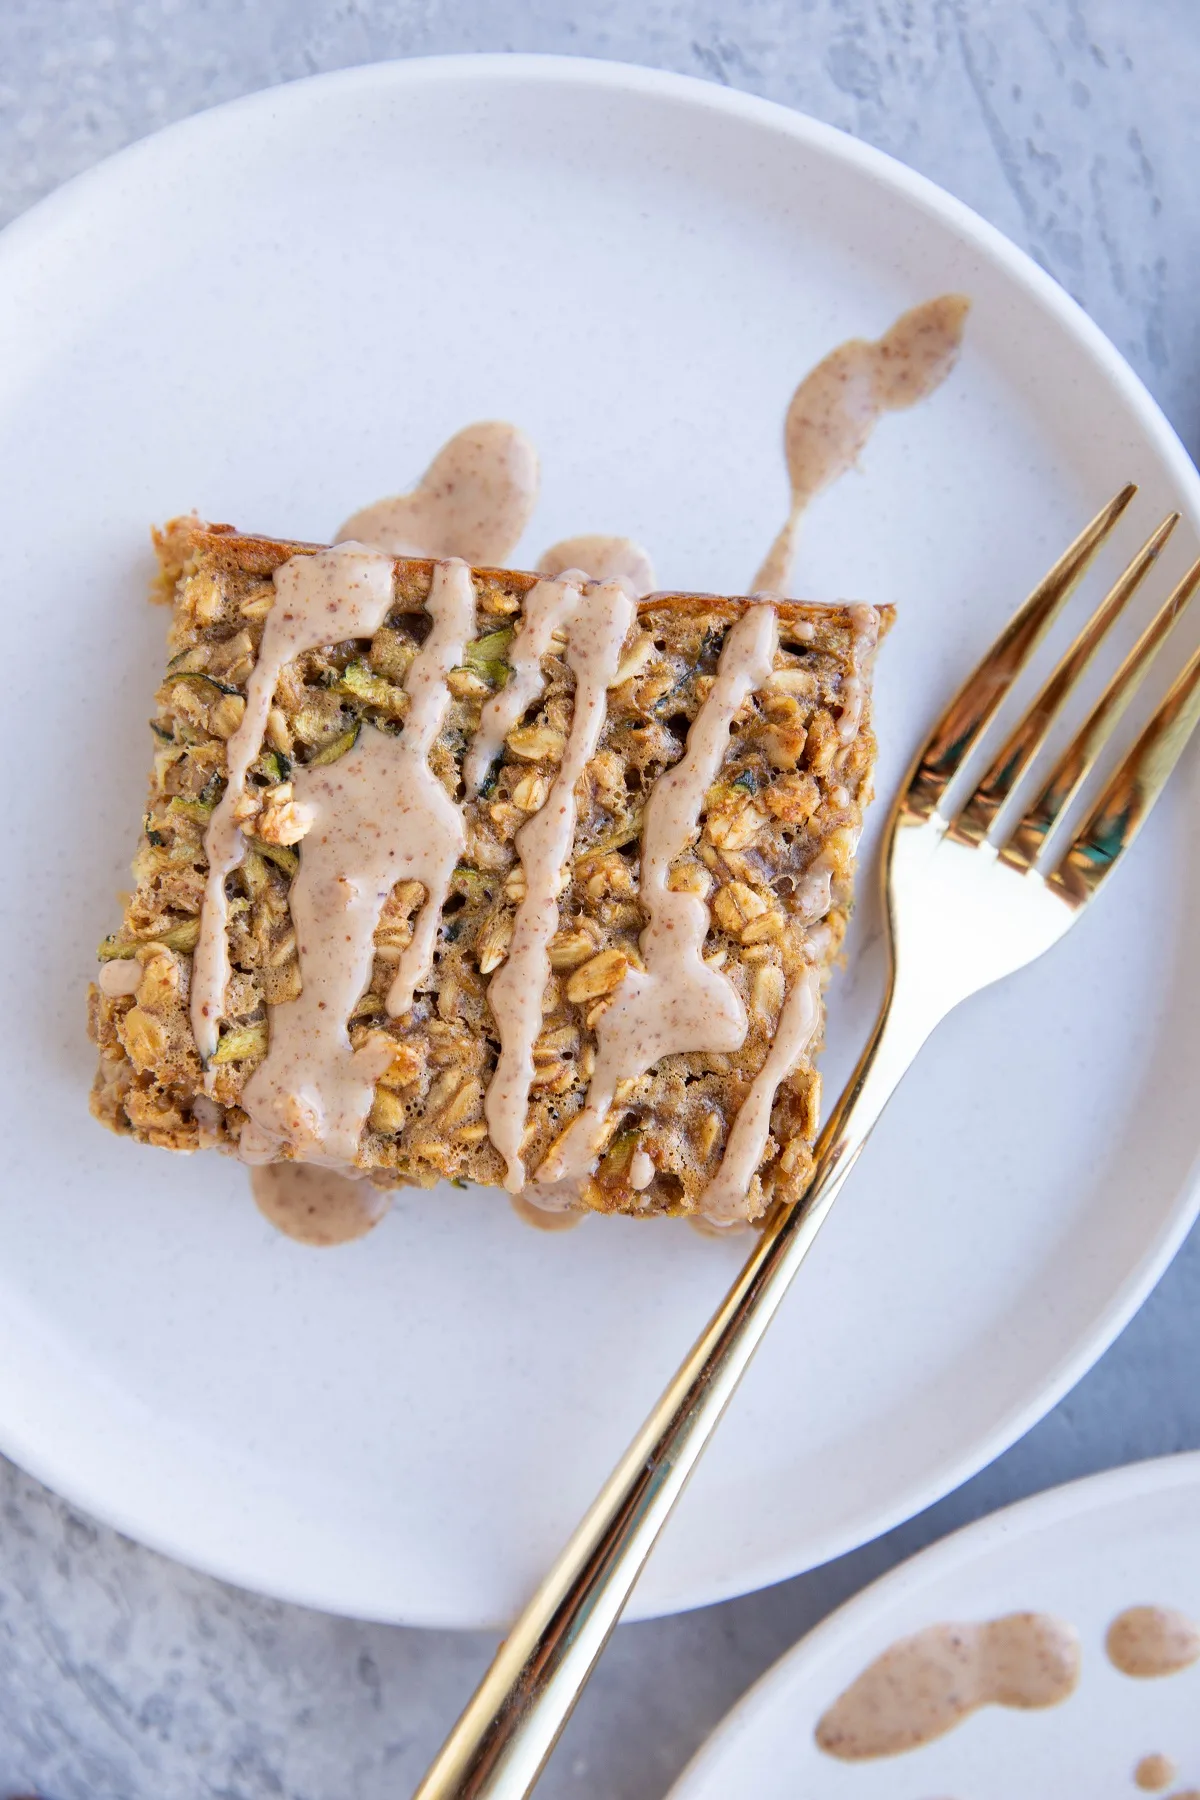 Slice of baked oatmeal on a white plate, drizzled with an almond butter glaze.